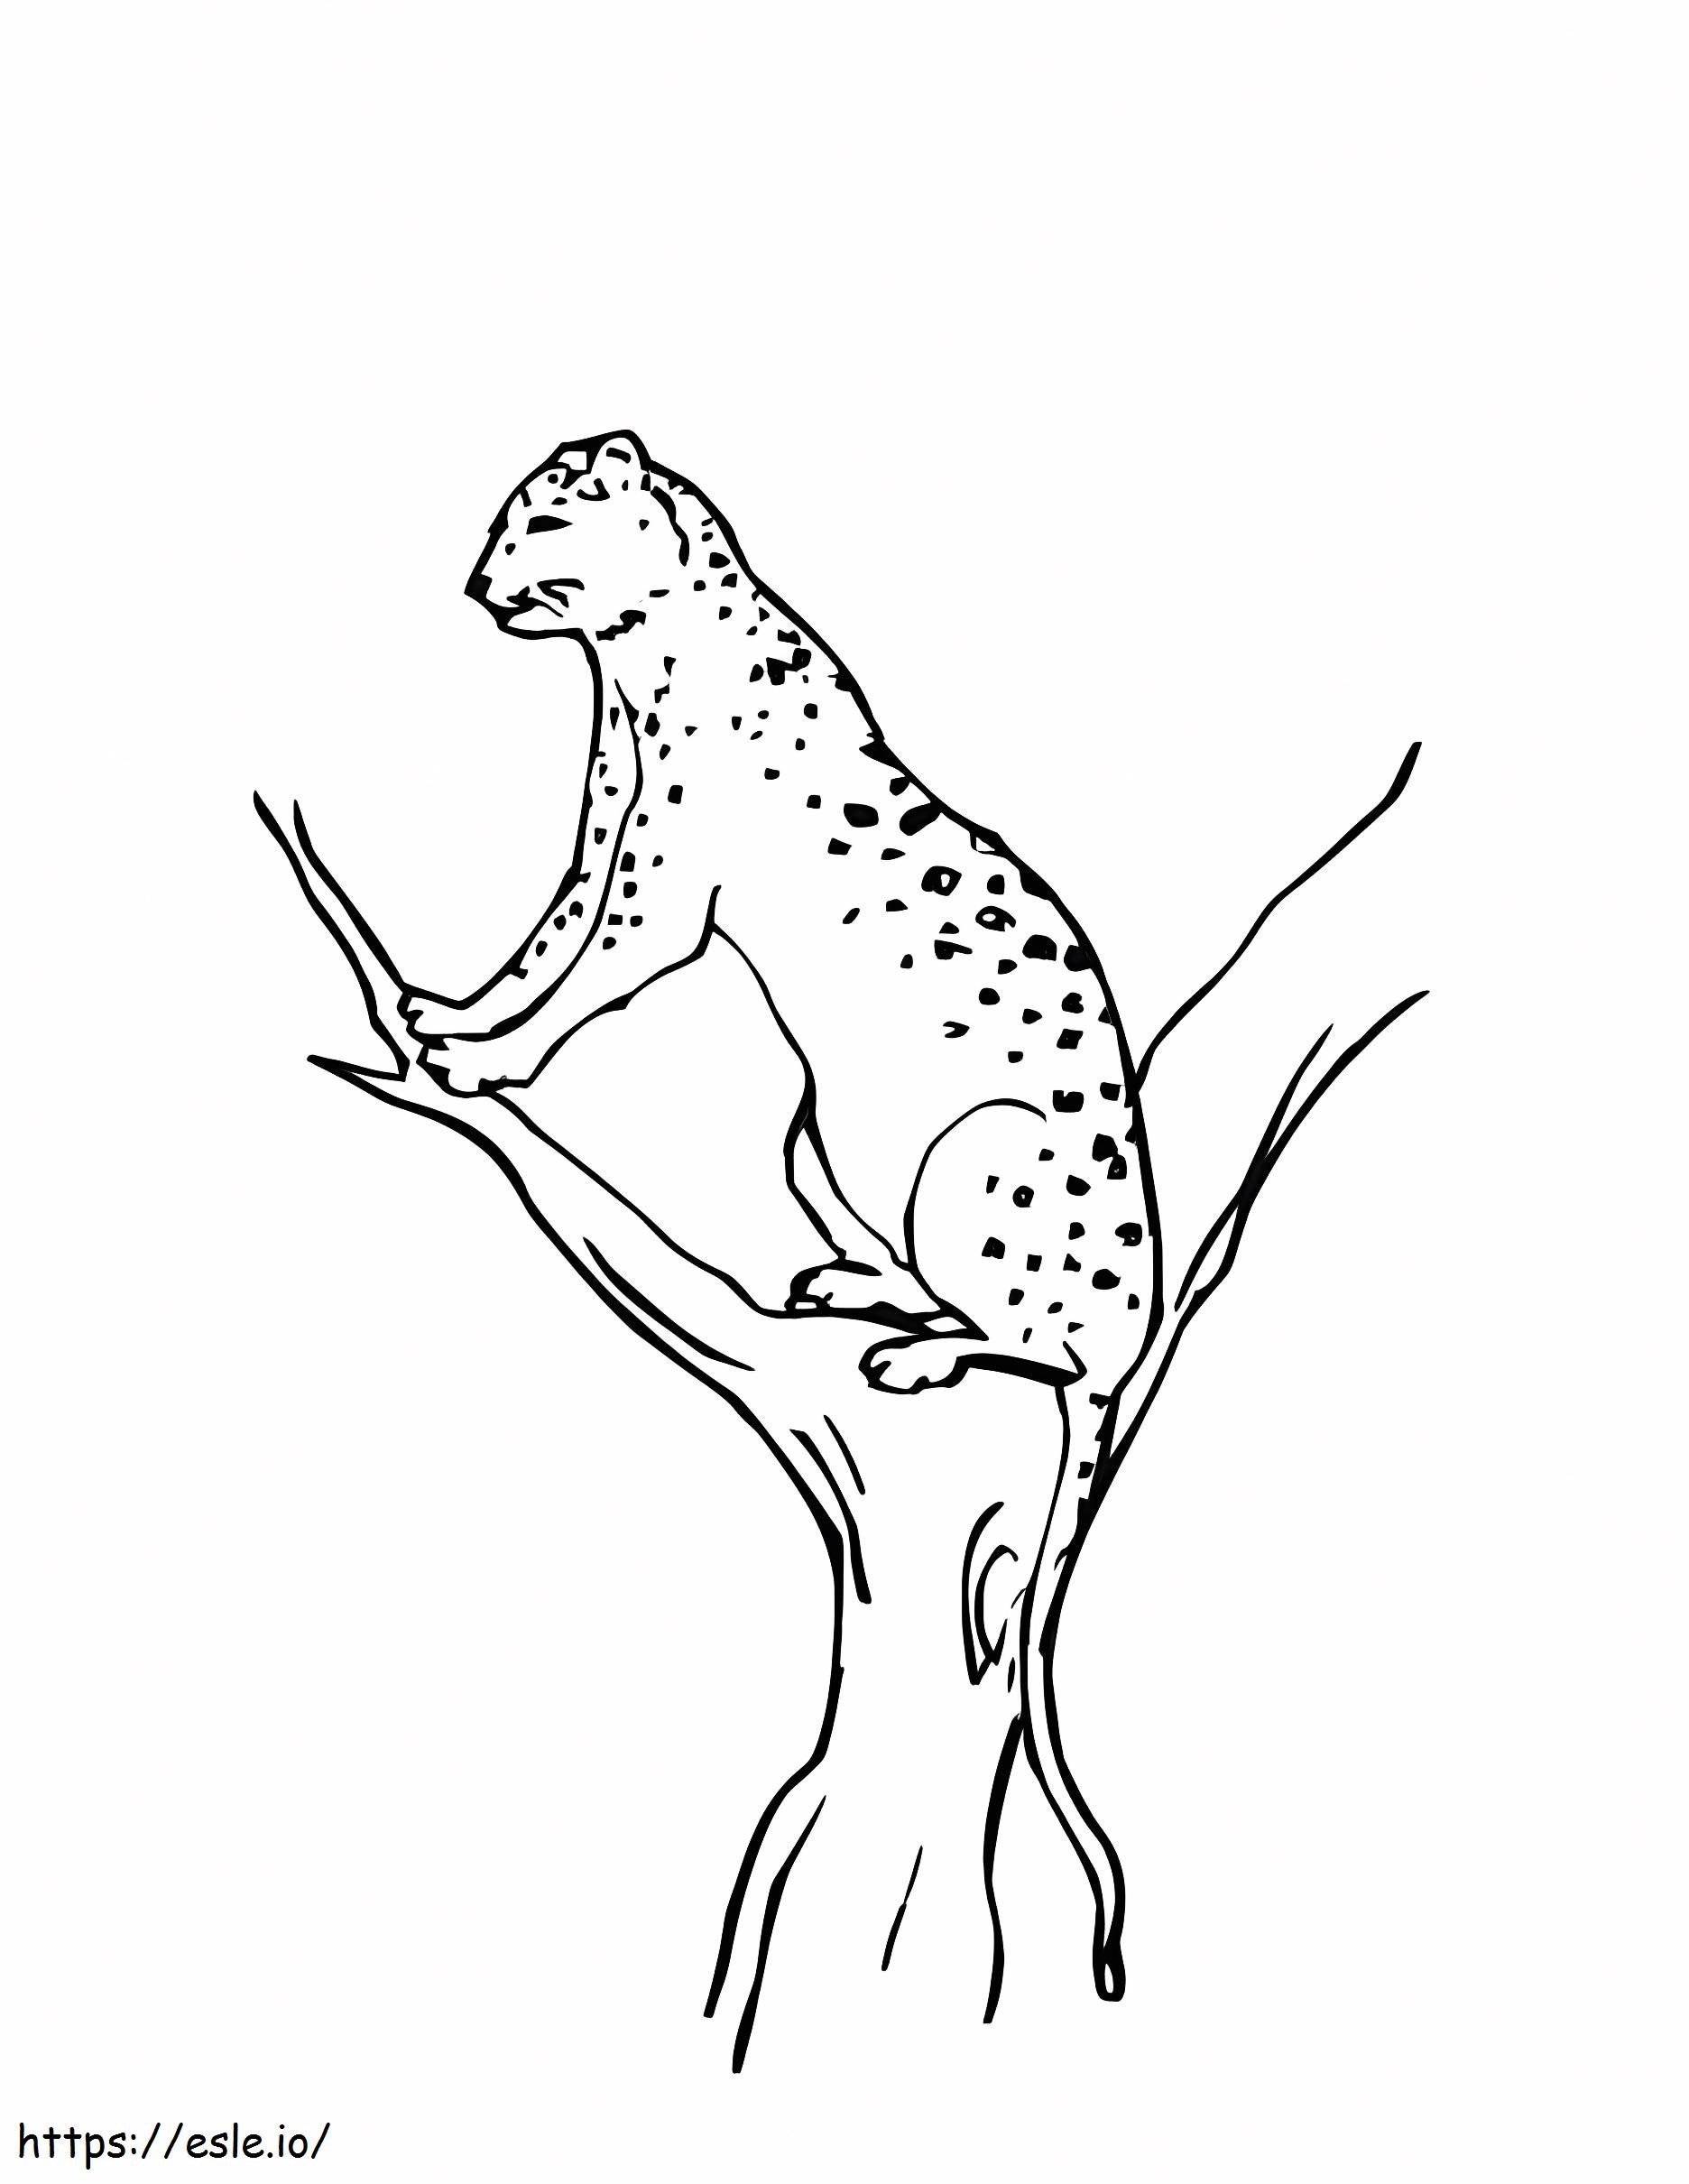 Snow Leopard On Tree Branch coloring page